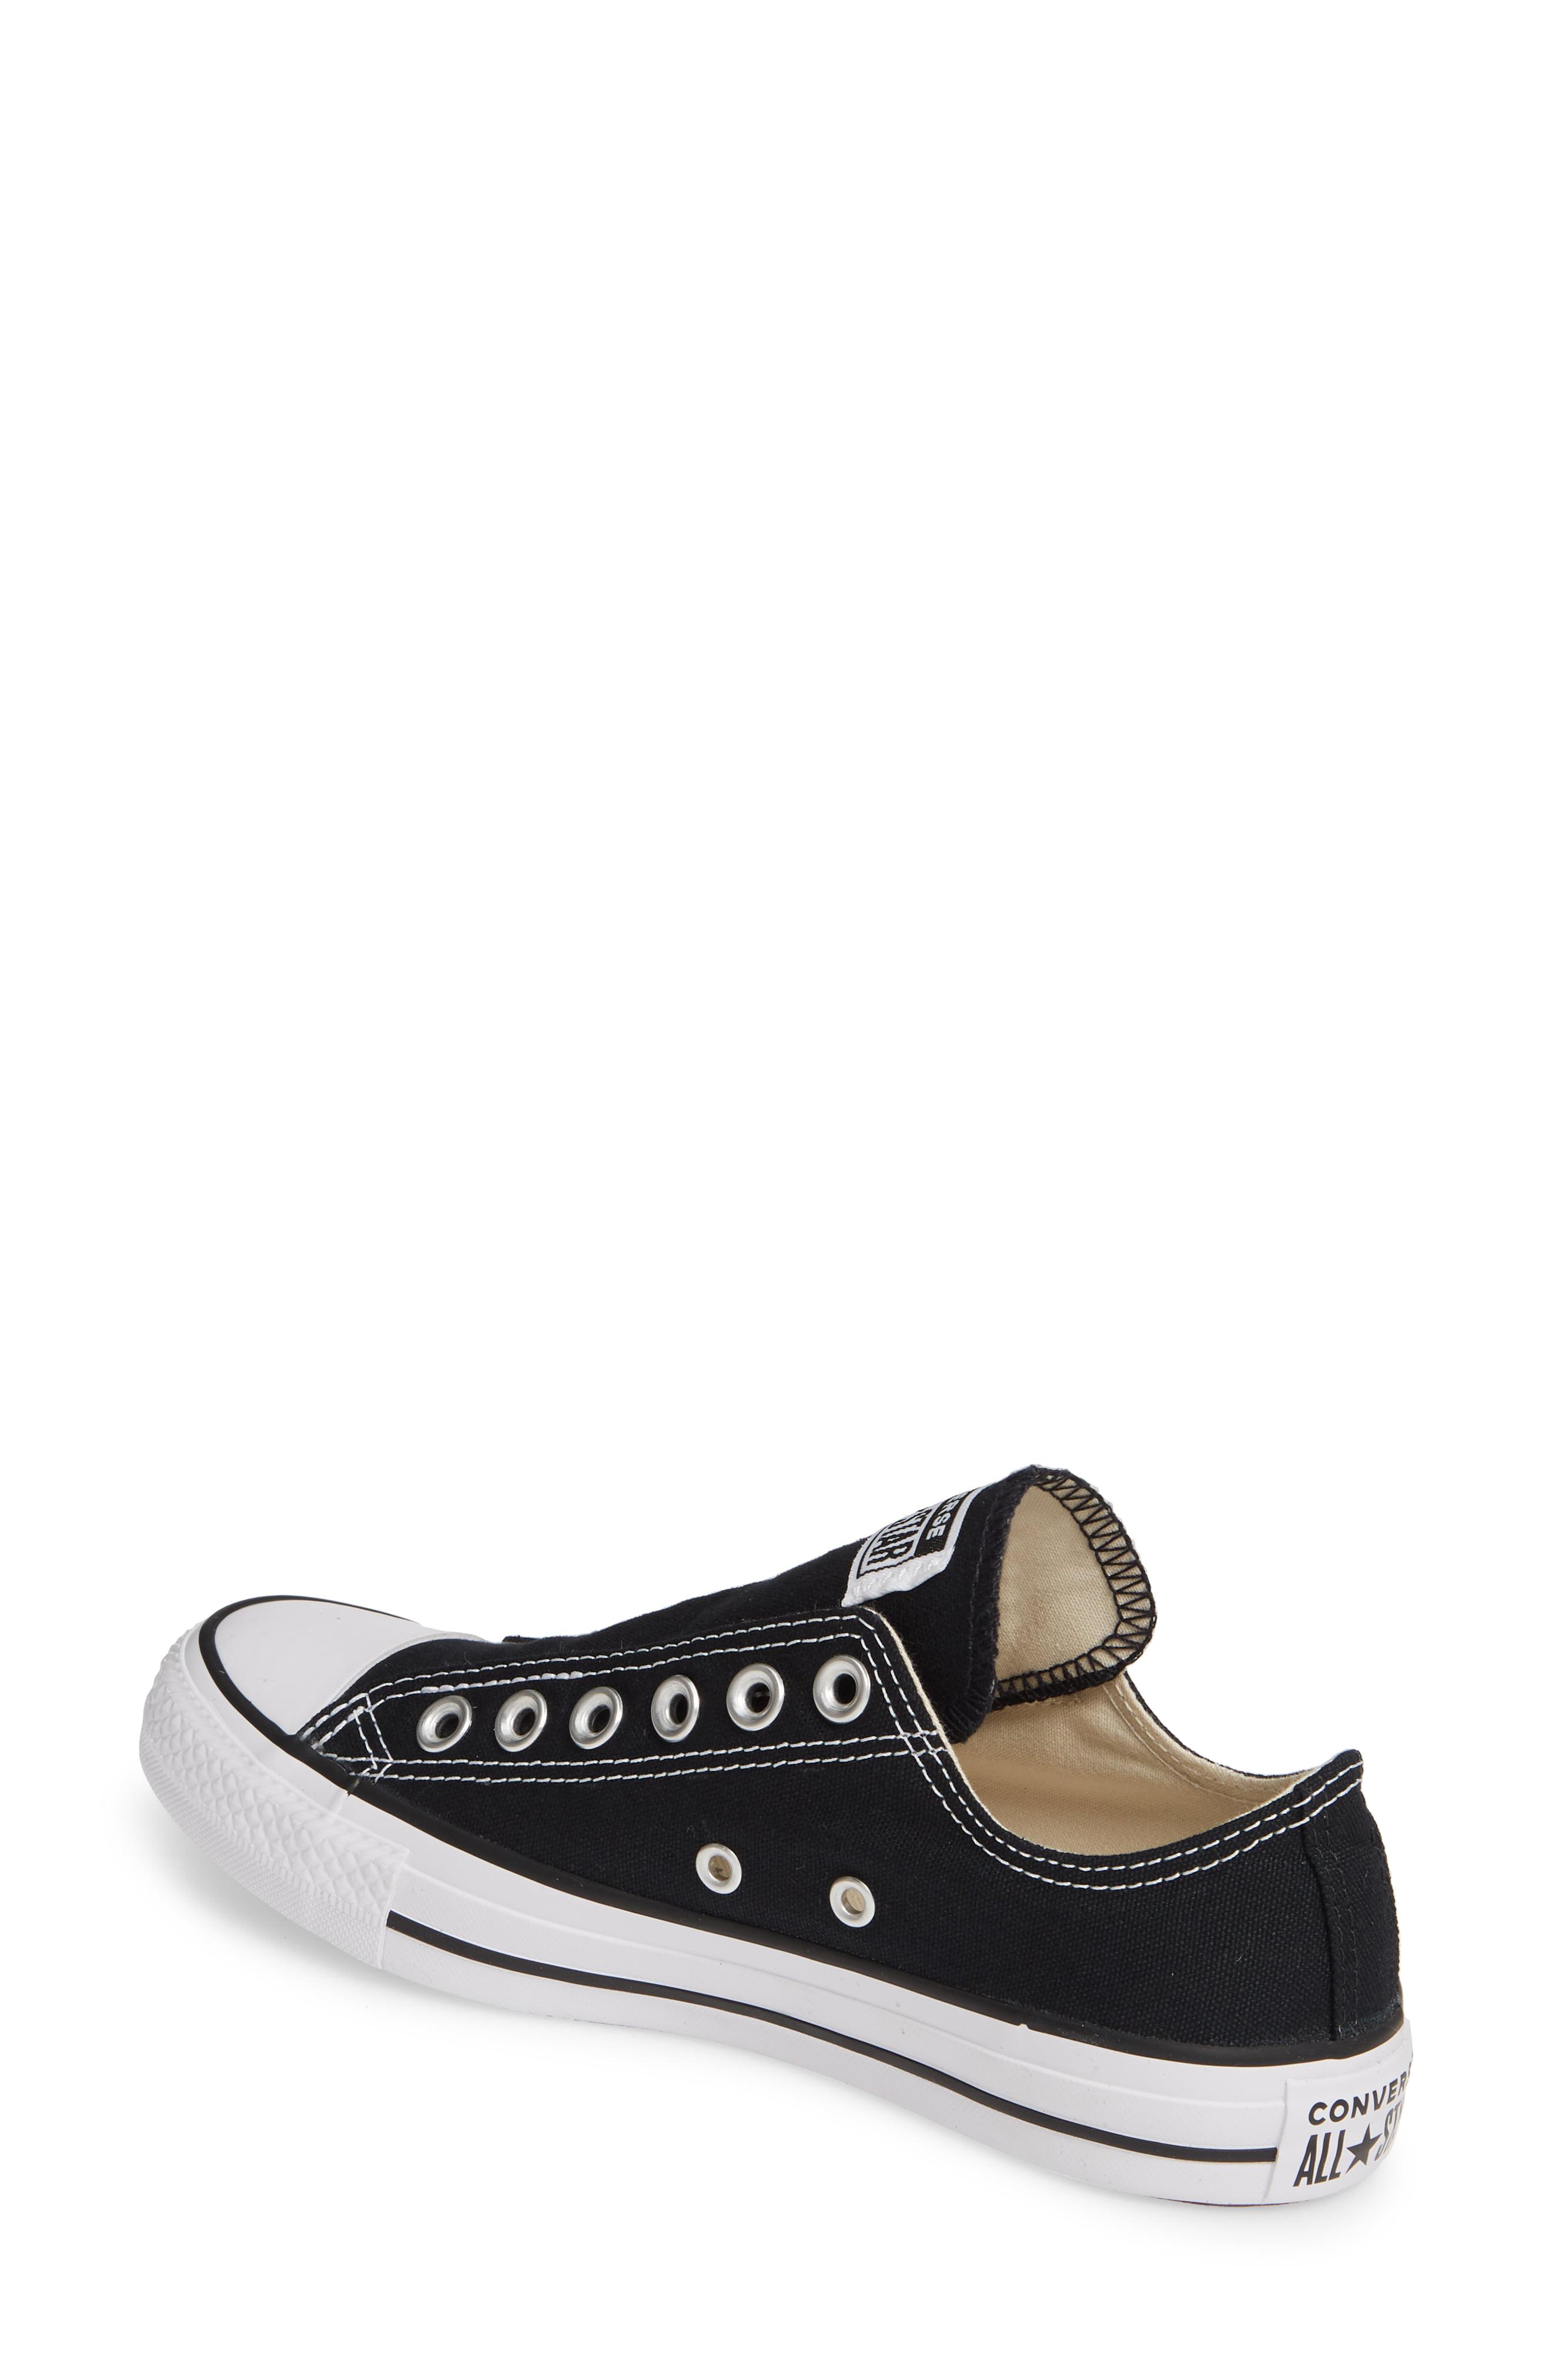 Lyst - Converse Chuck Taylor All Star Laceless Low Top Sneaker in Black